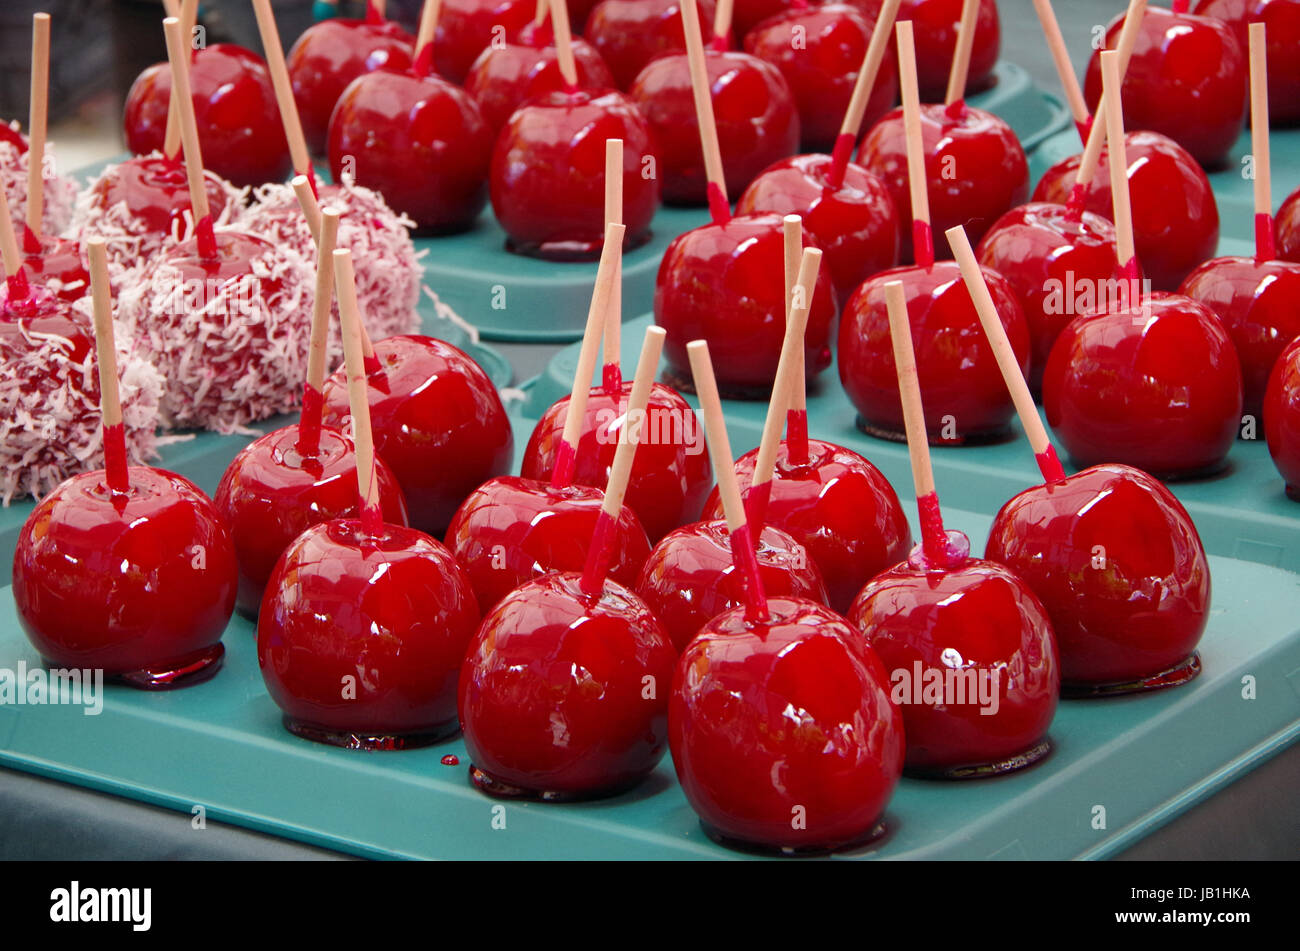 Red candy apples hand dipped in sticky sugar glaze Stock Photo